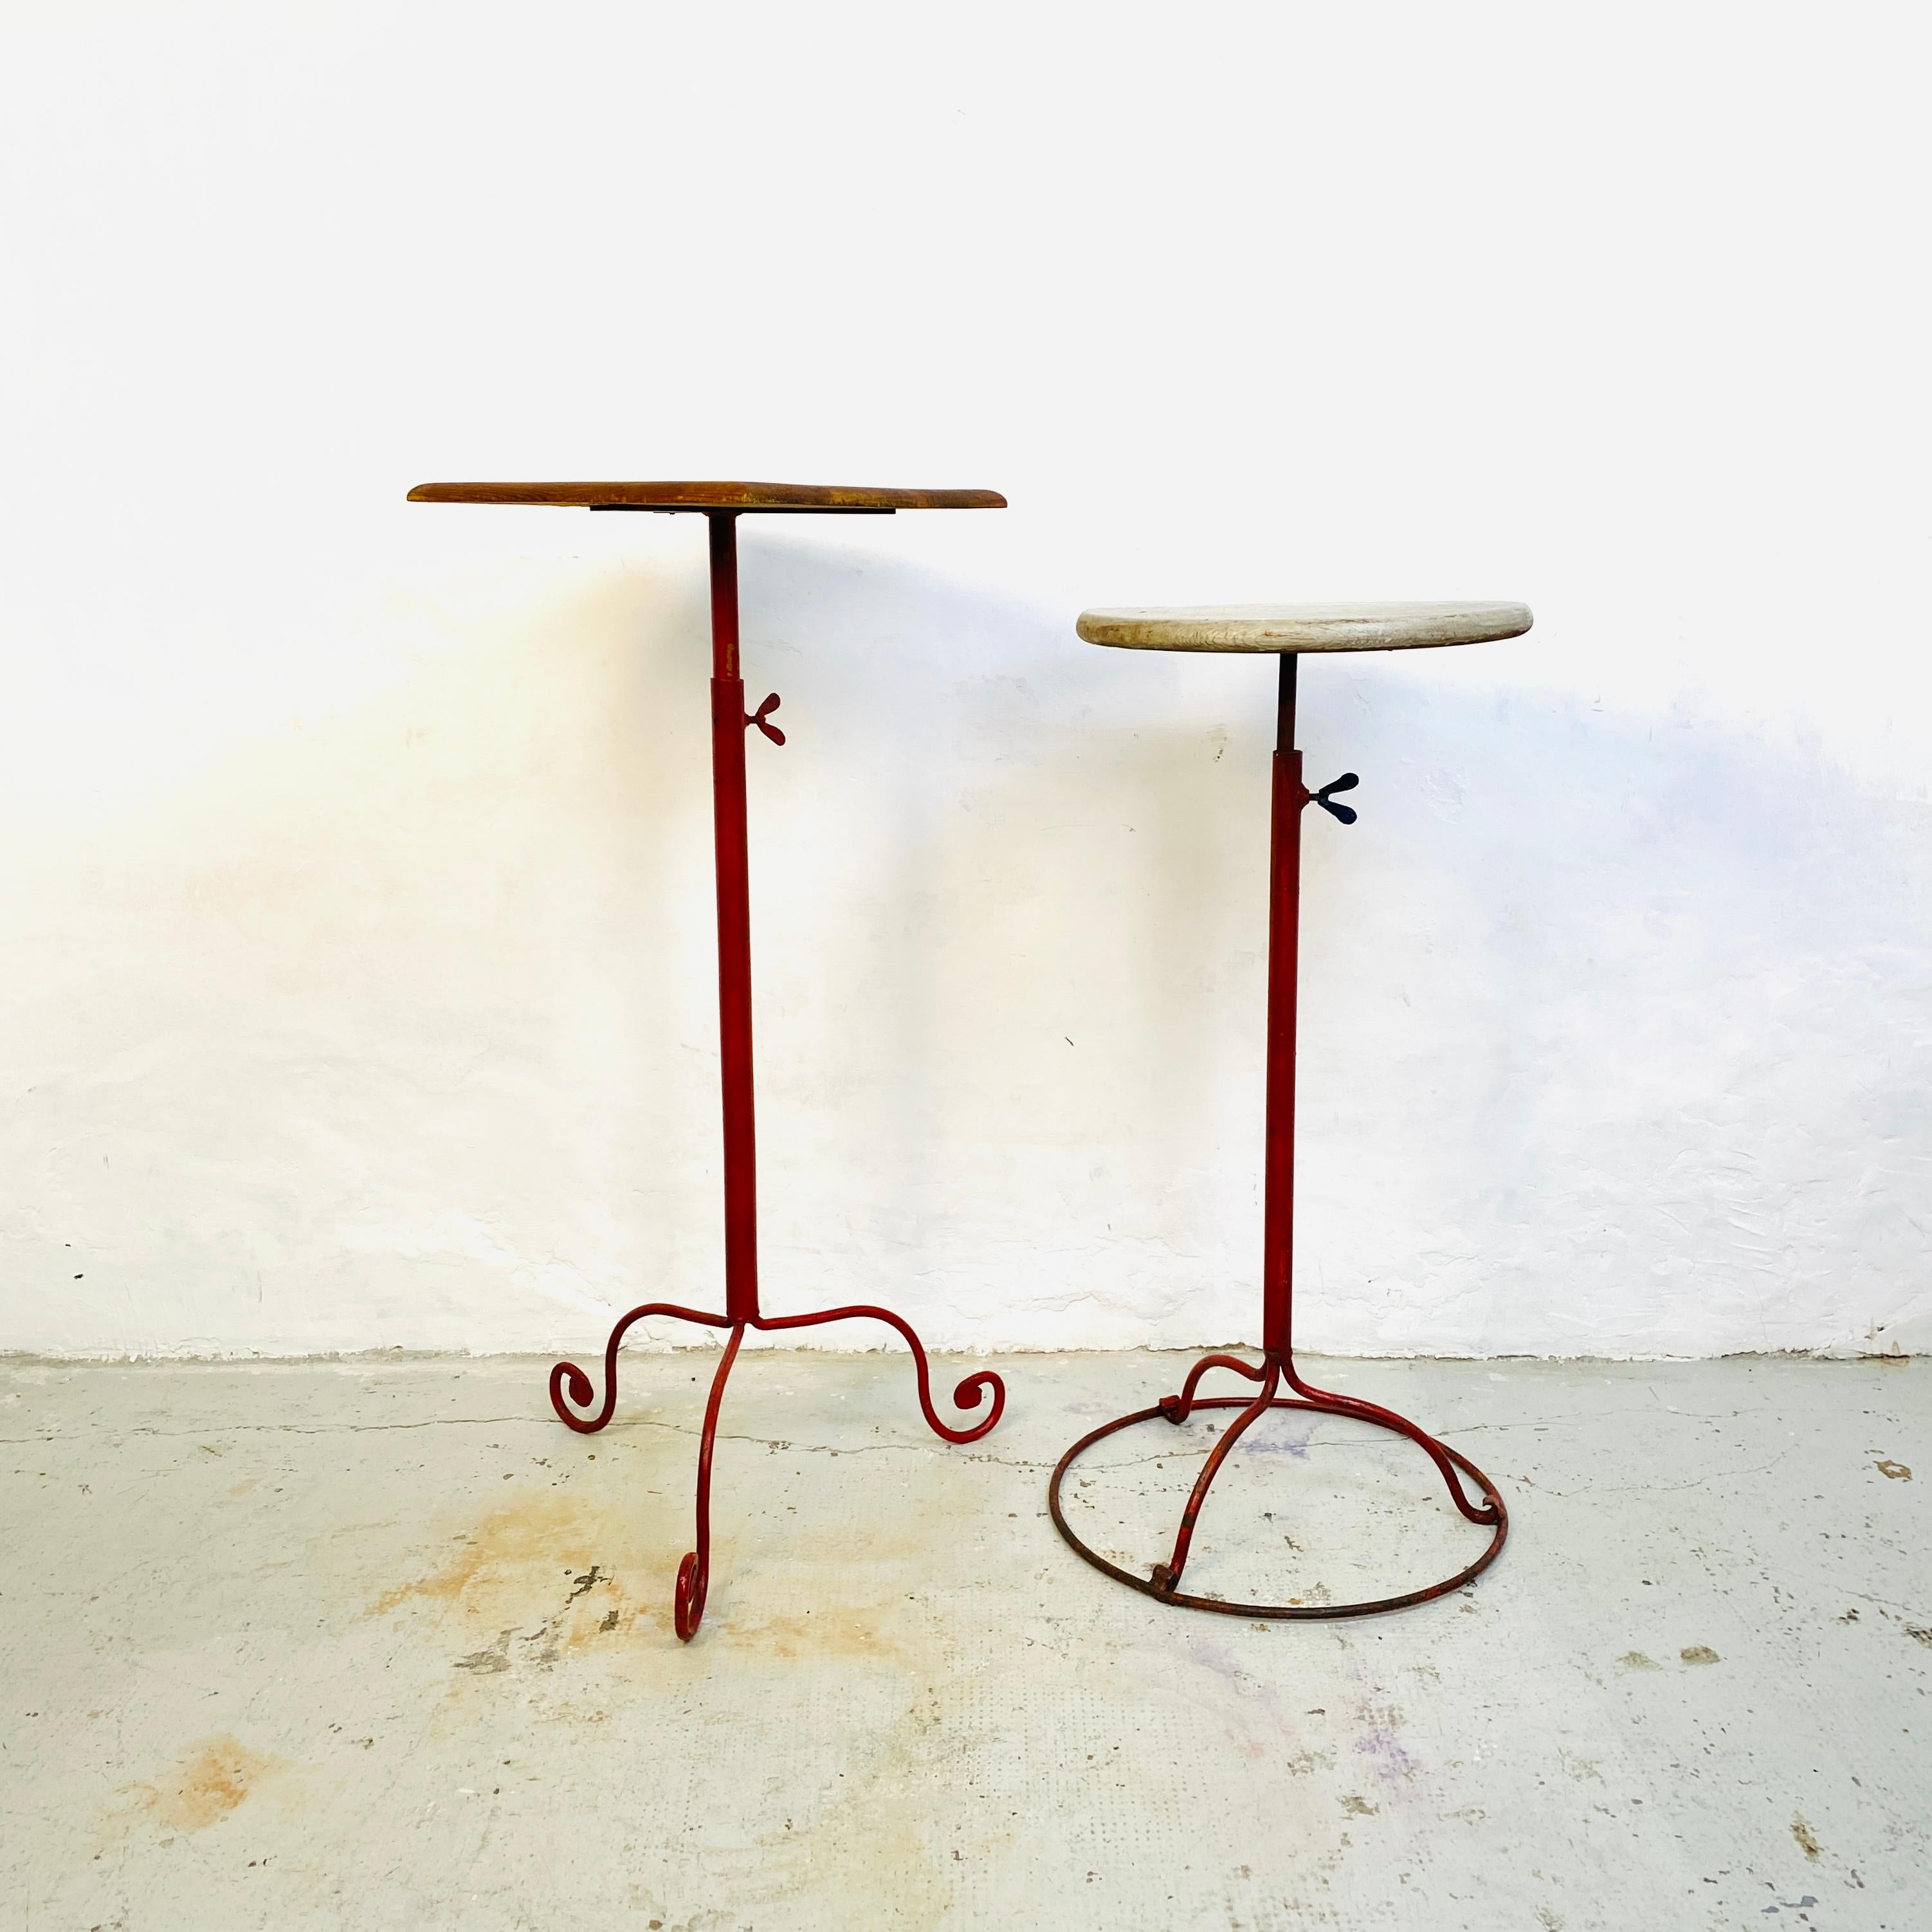 Italian early twentieth century Iron and solid wood pedestals, 1900s
Pair of pedestals with rectangular and round solid  wood shelves and structure in painted and worked wrought iron.
This are perfect for a sculpture, a plant vase or for a bathroom